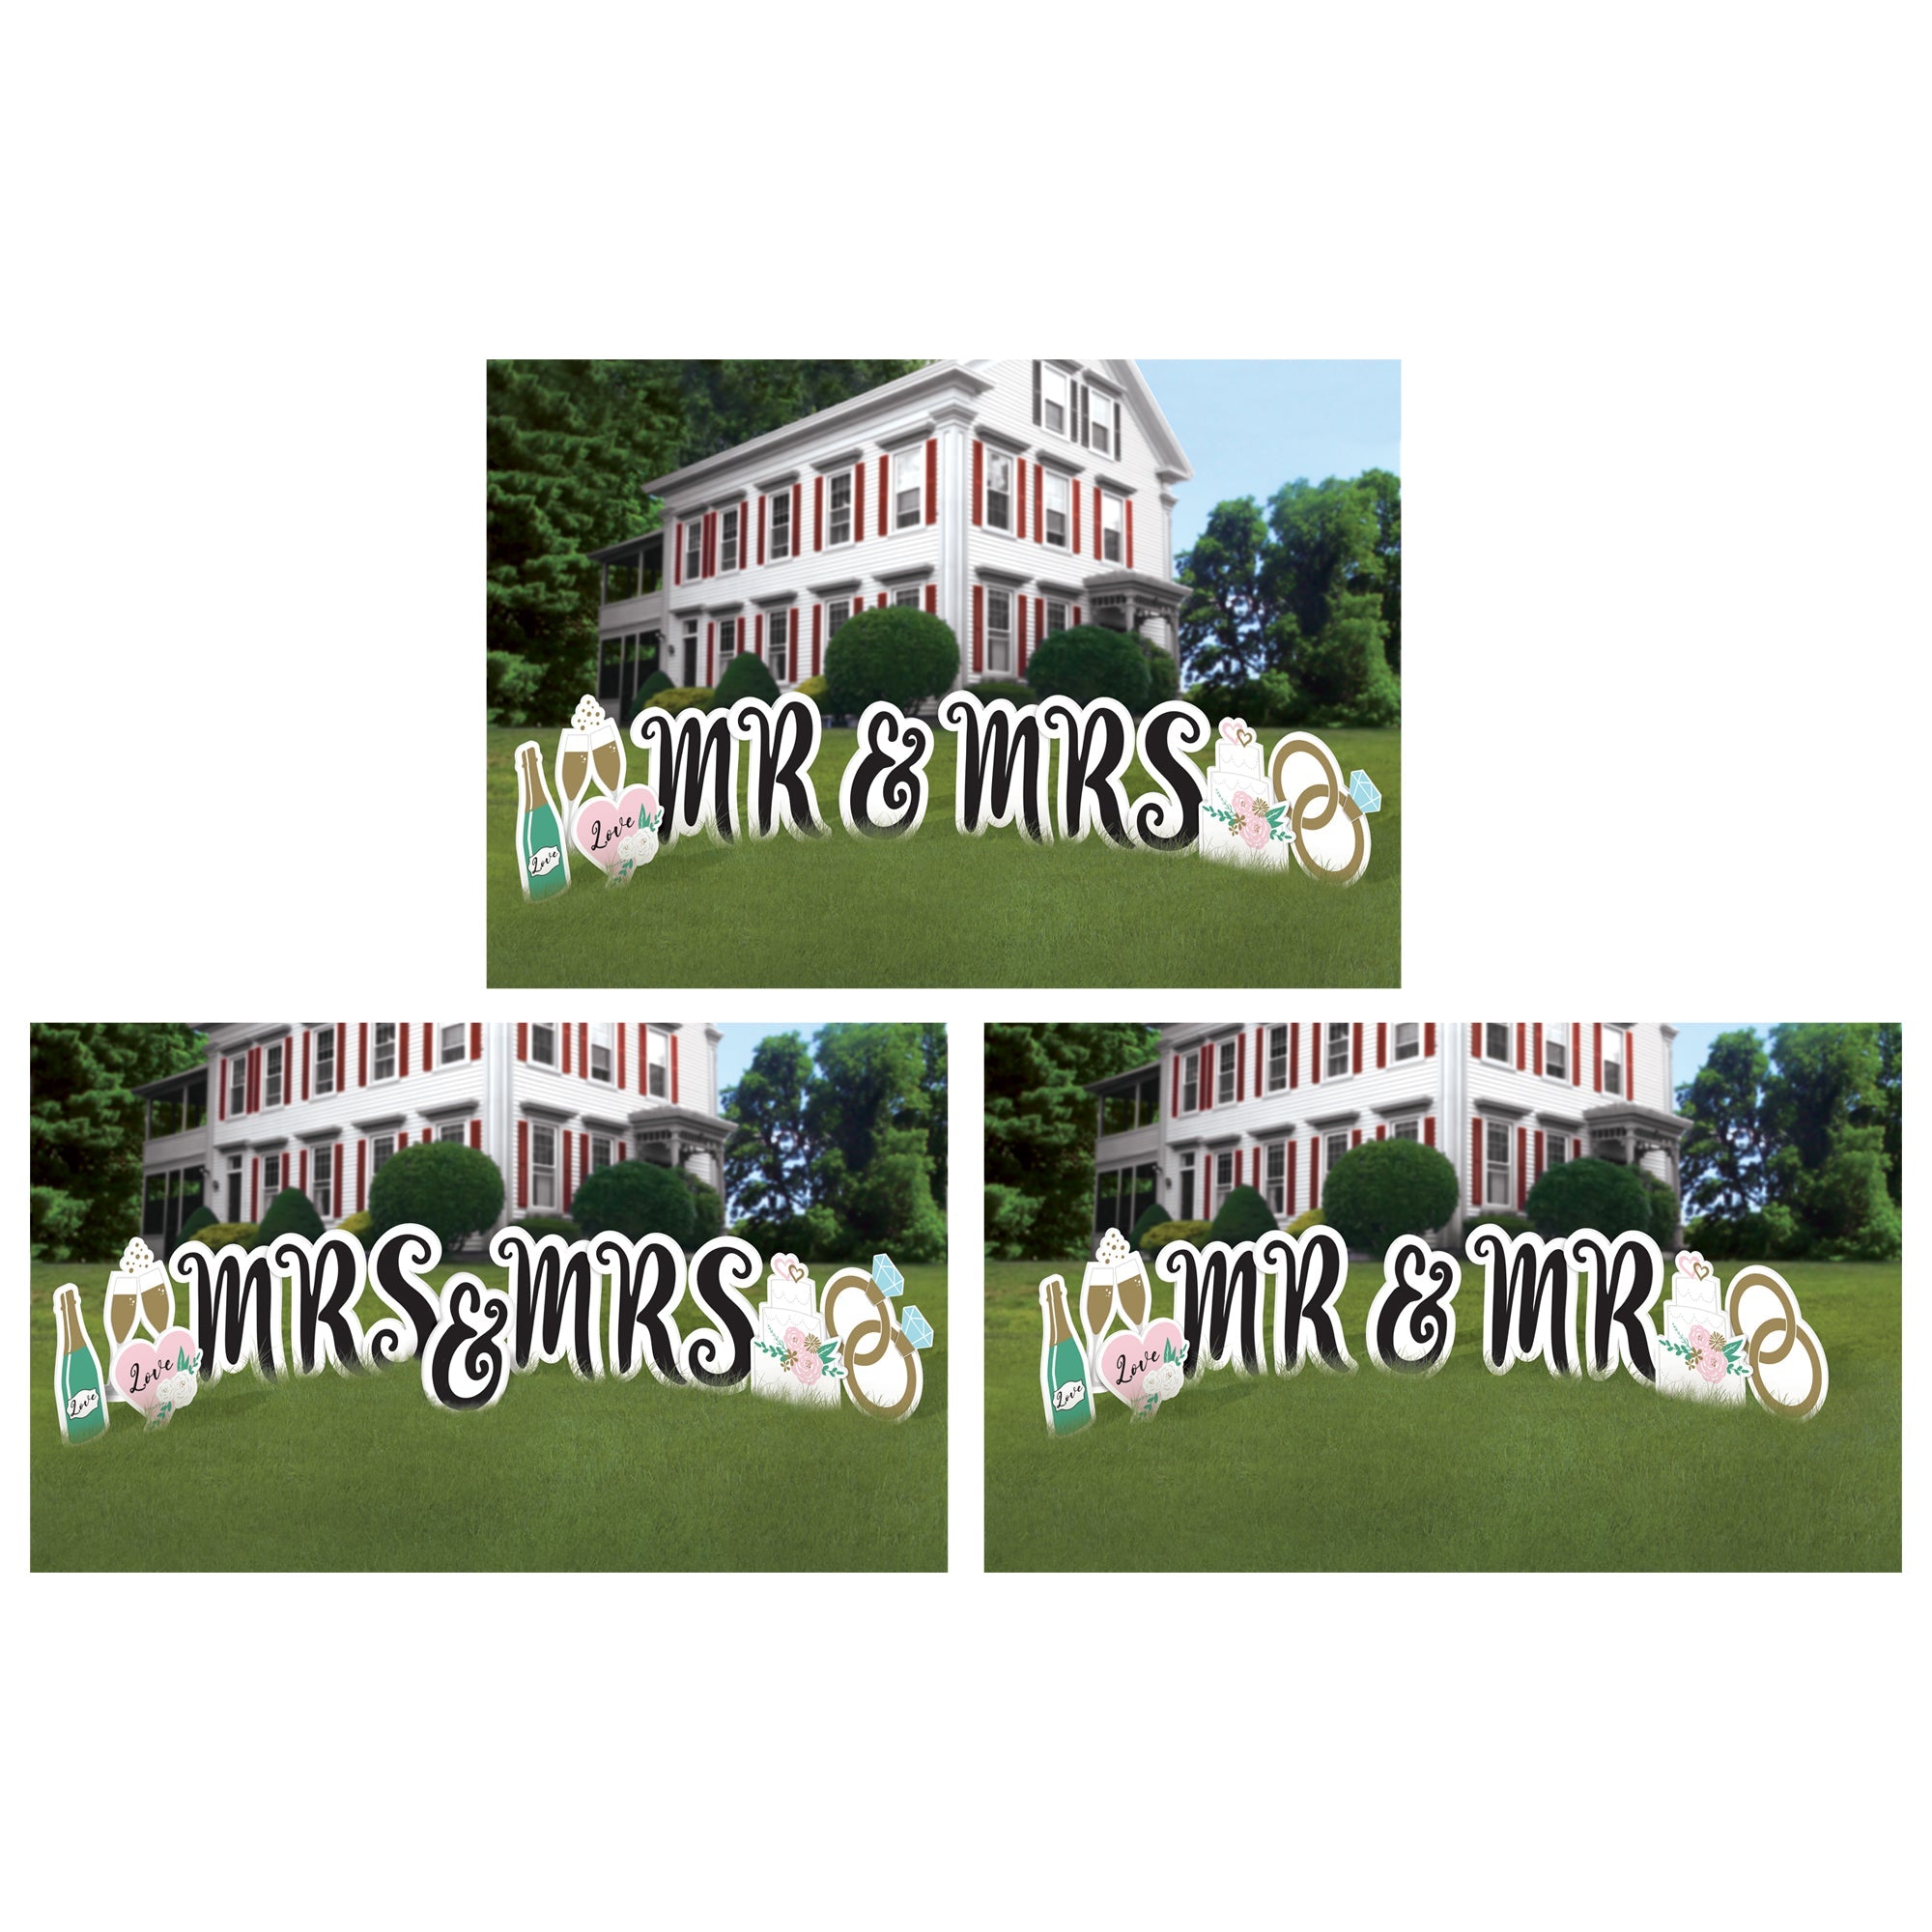 Wedding Couple 14 piece Yard Sign set with Options for Mr & Mr and Mrs & Mrs!